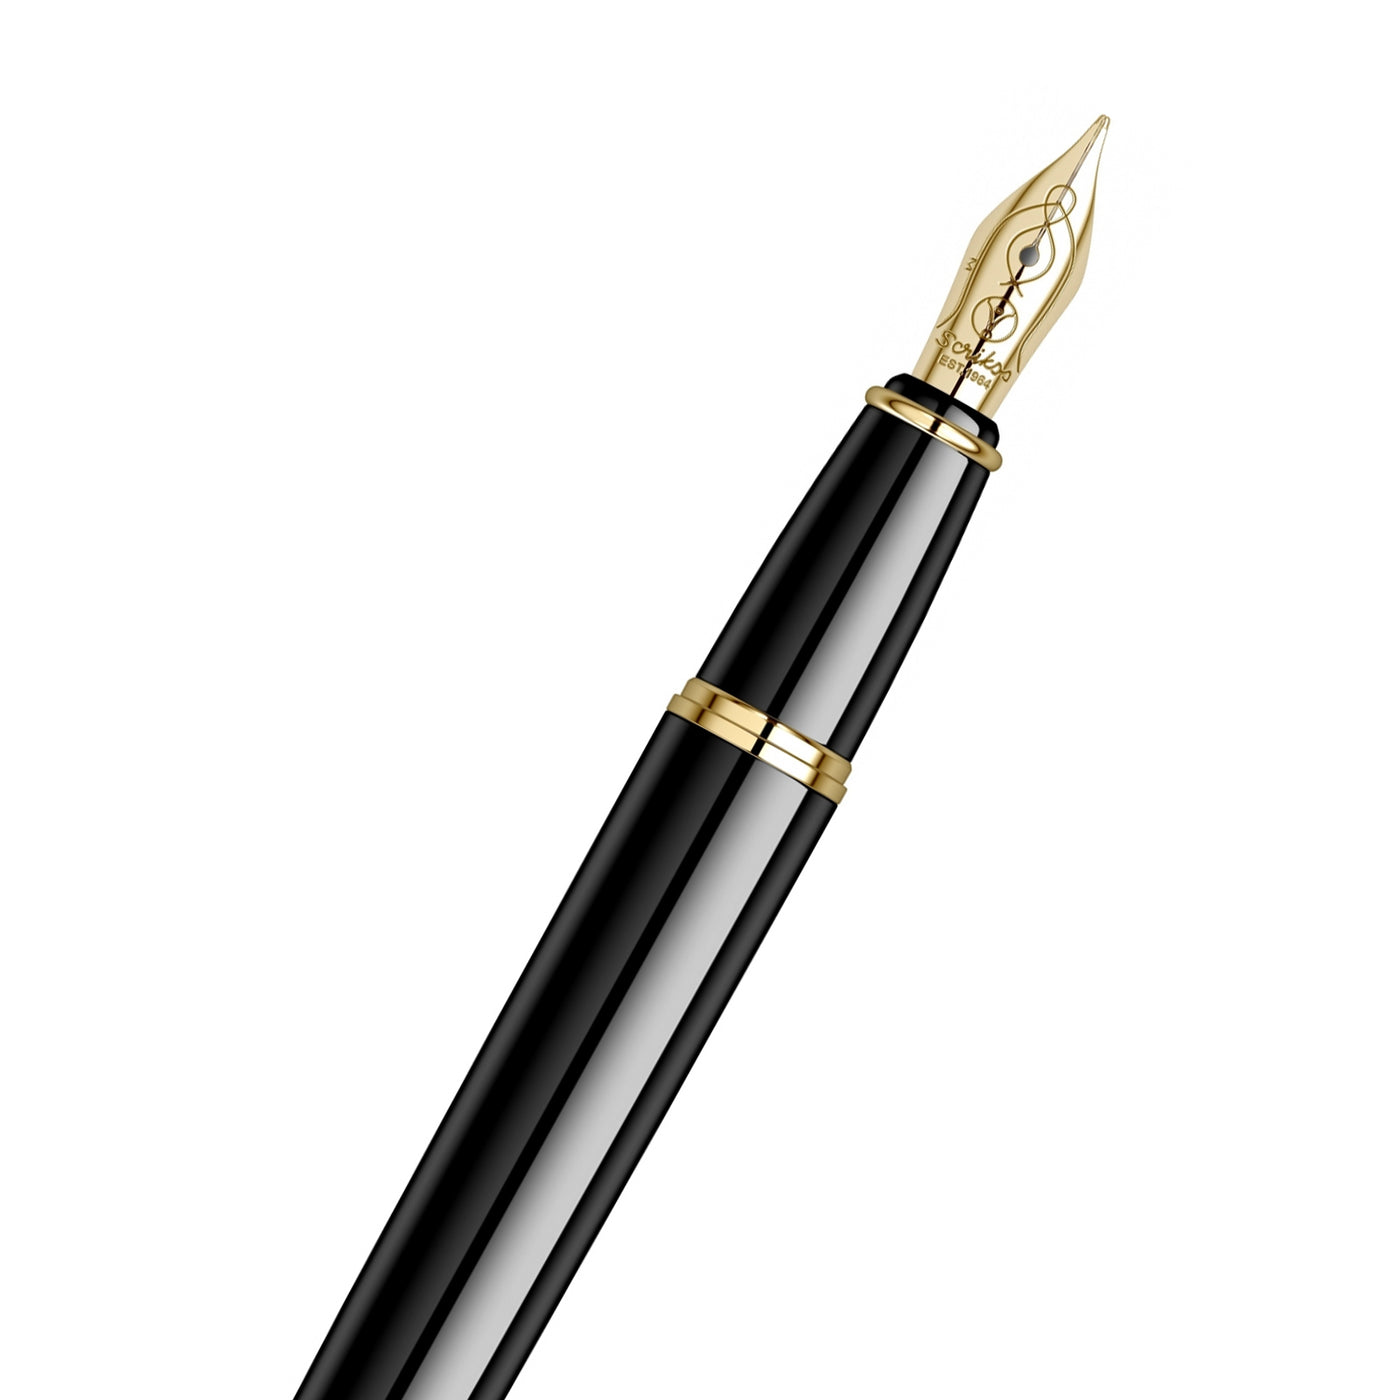 Scrikss Honour 38 Glossy Black Medium Nib Fountain Ink Pen With Gold Plated Trims, Upper n Lower Brass Body and Grip Coated With Multiple Layers Of Black Lacquer, Pen Works With Both Converter & Cartridge, Elegance Collection 62422